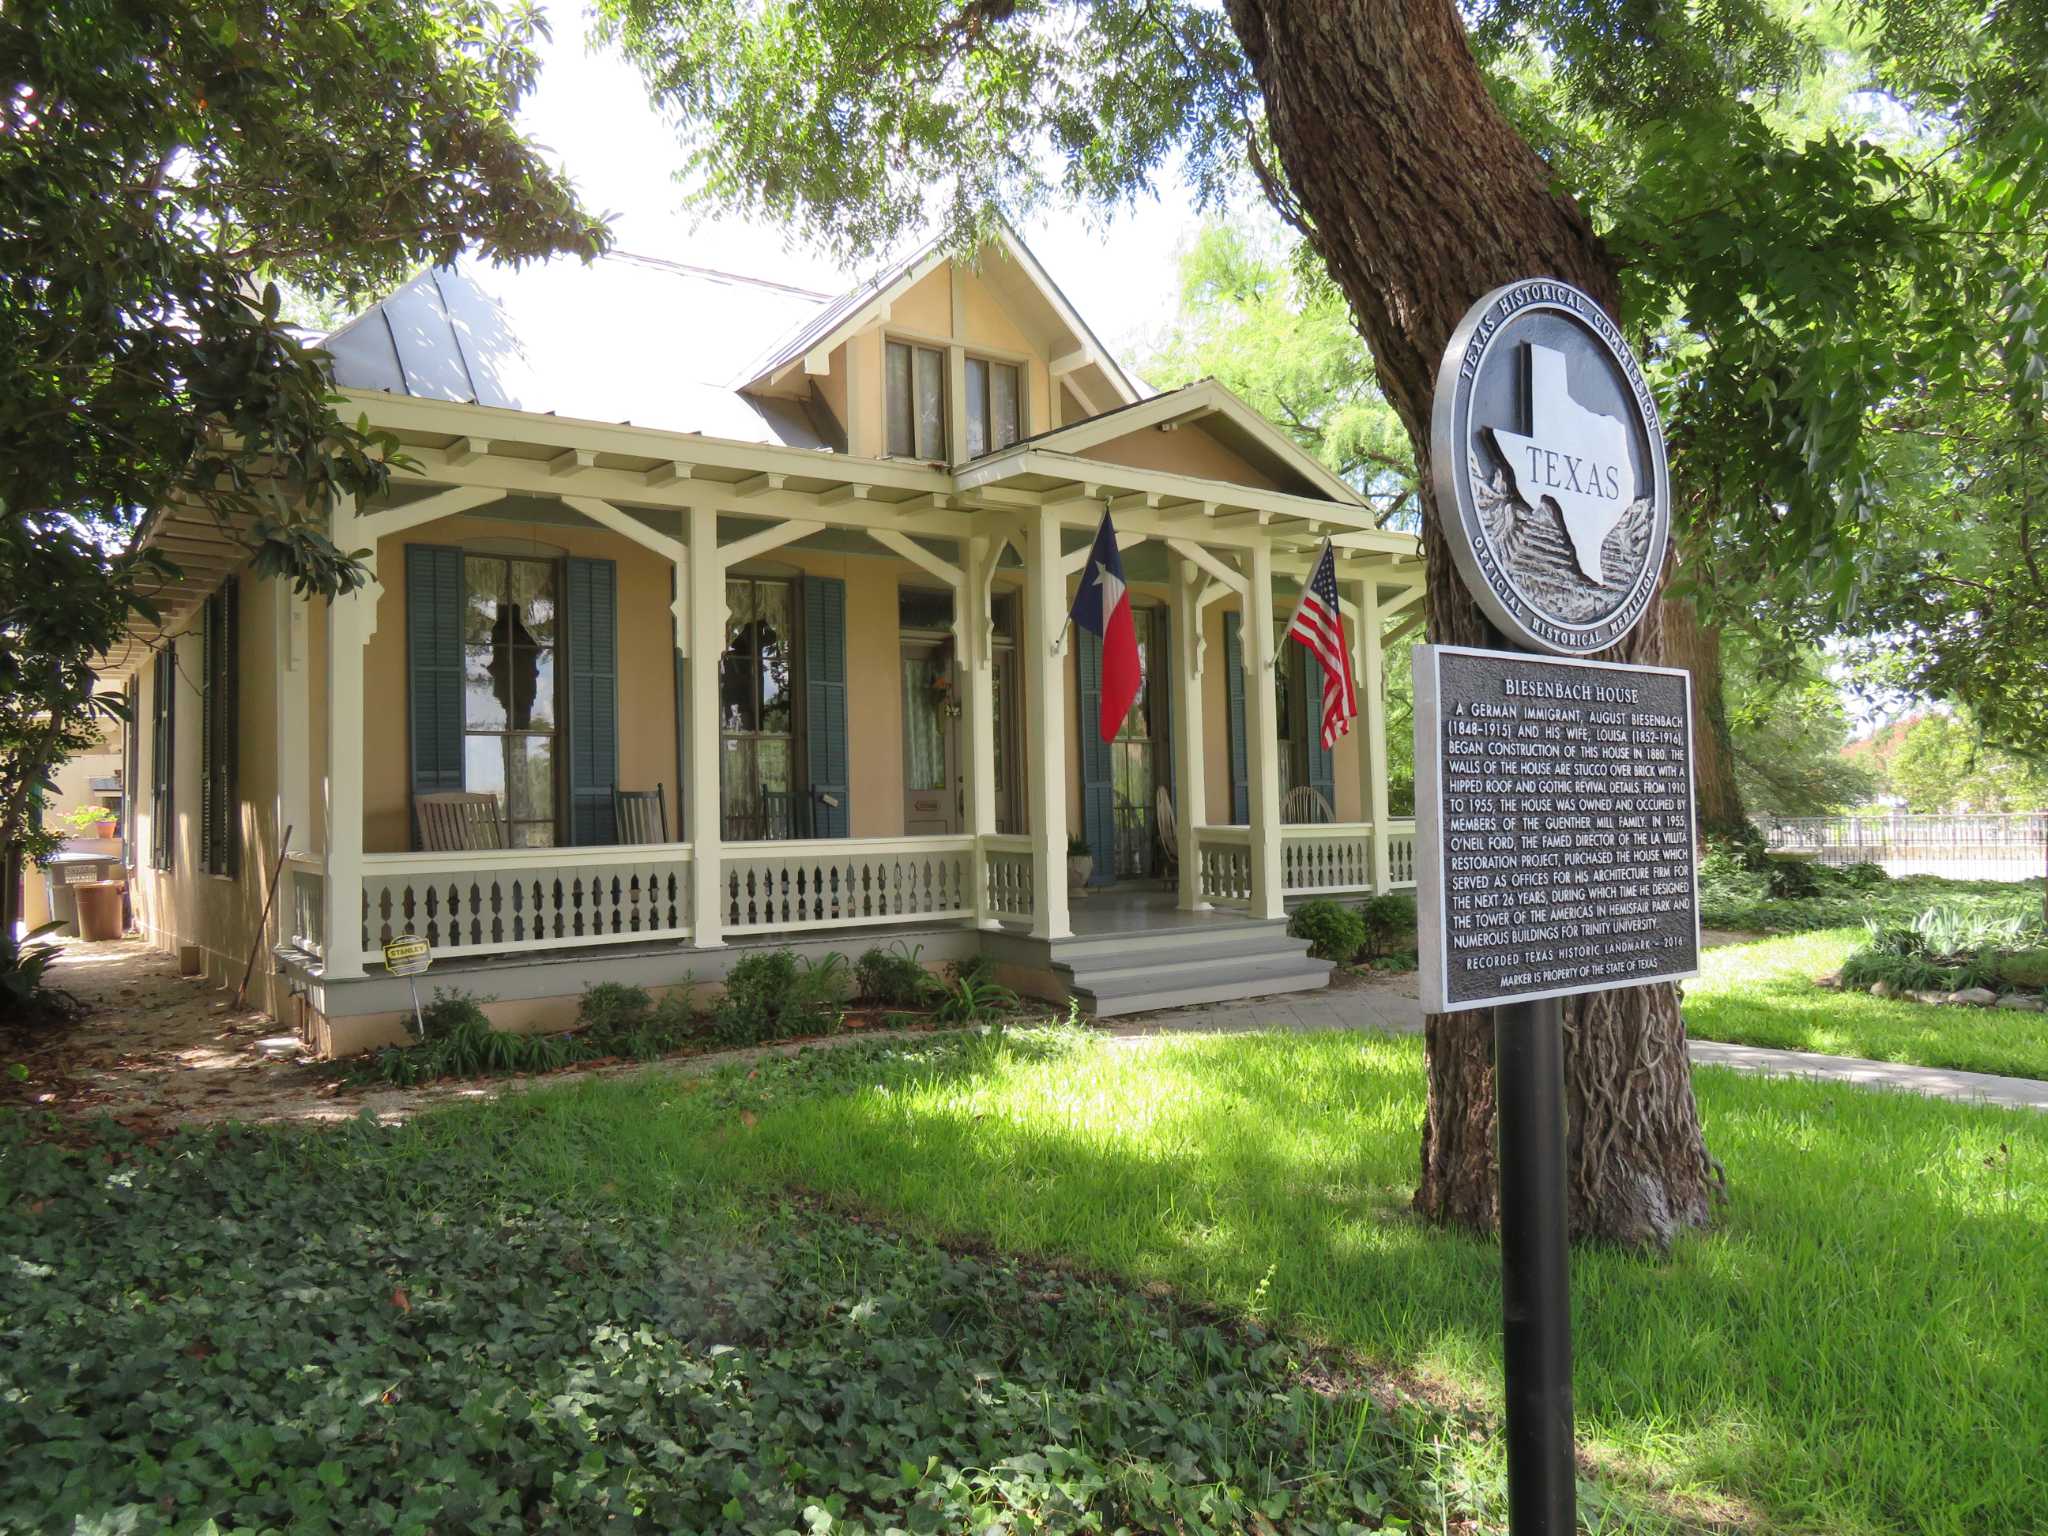 Owners of historic homes in San Antonio are “stewards” of their homes